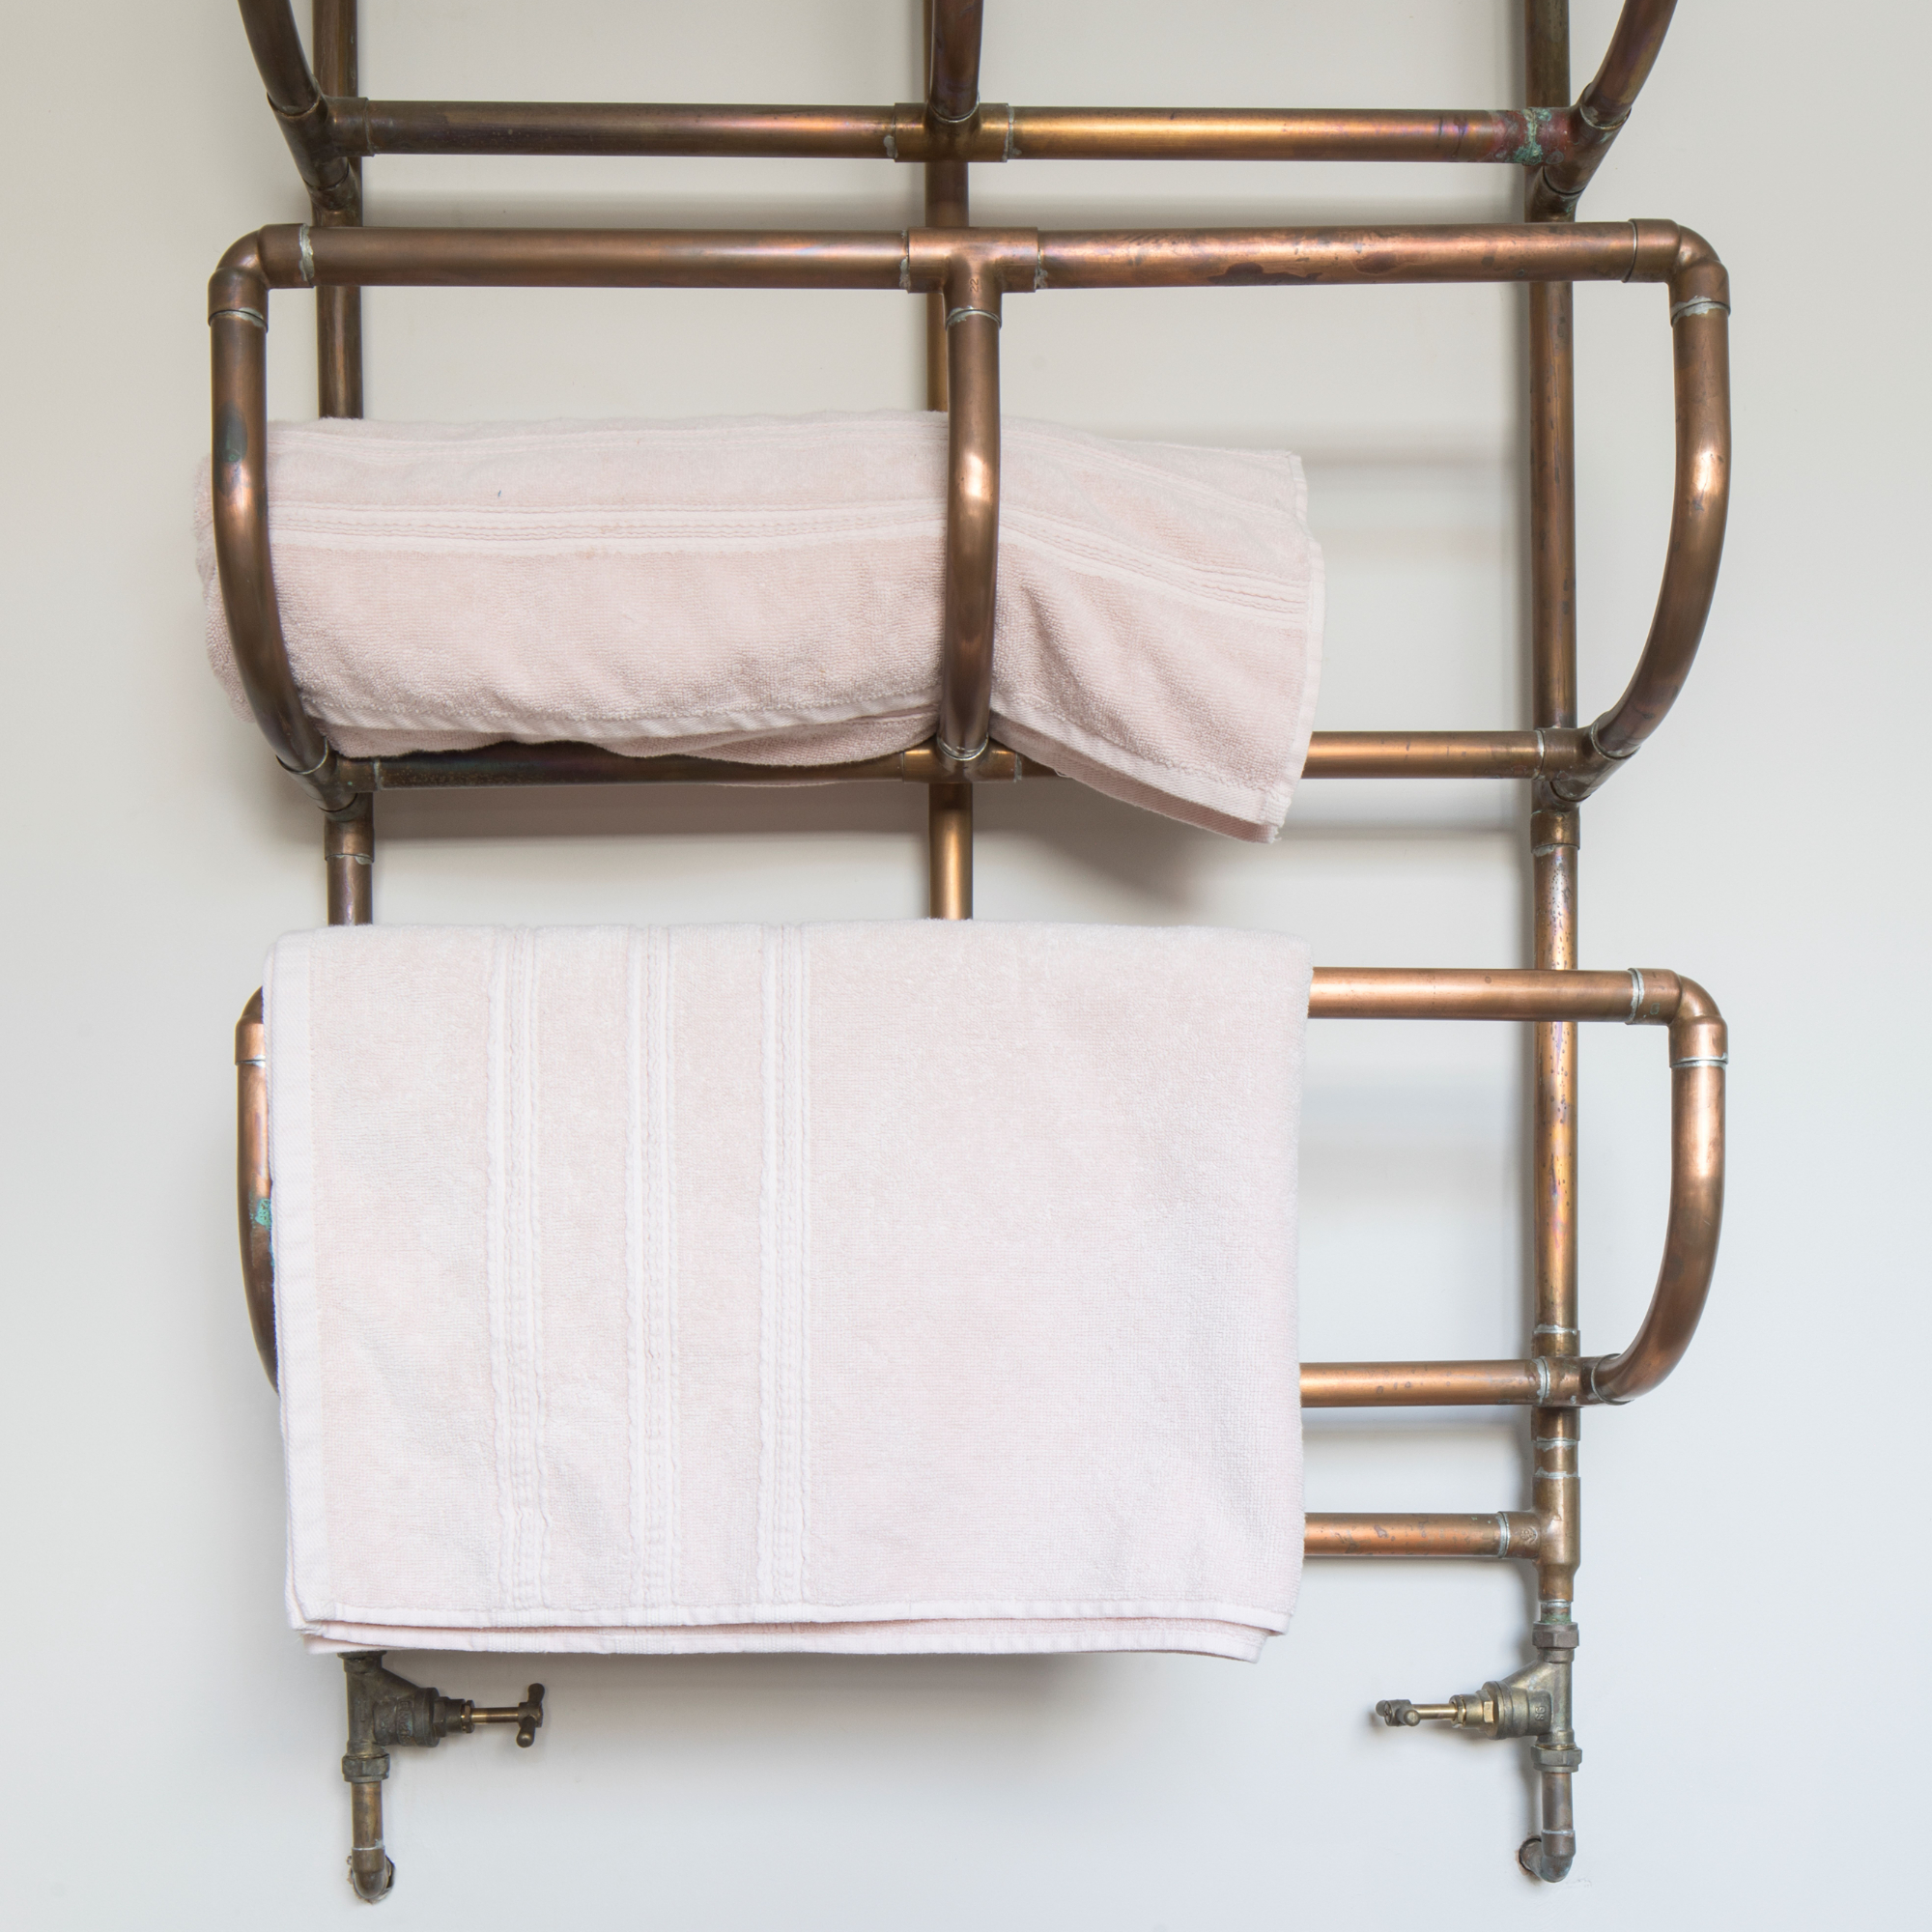 Gold metallic towel rails with towels hanging and stored